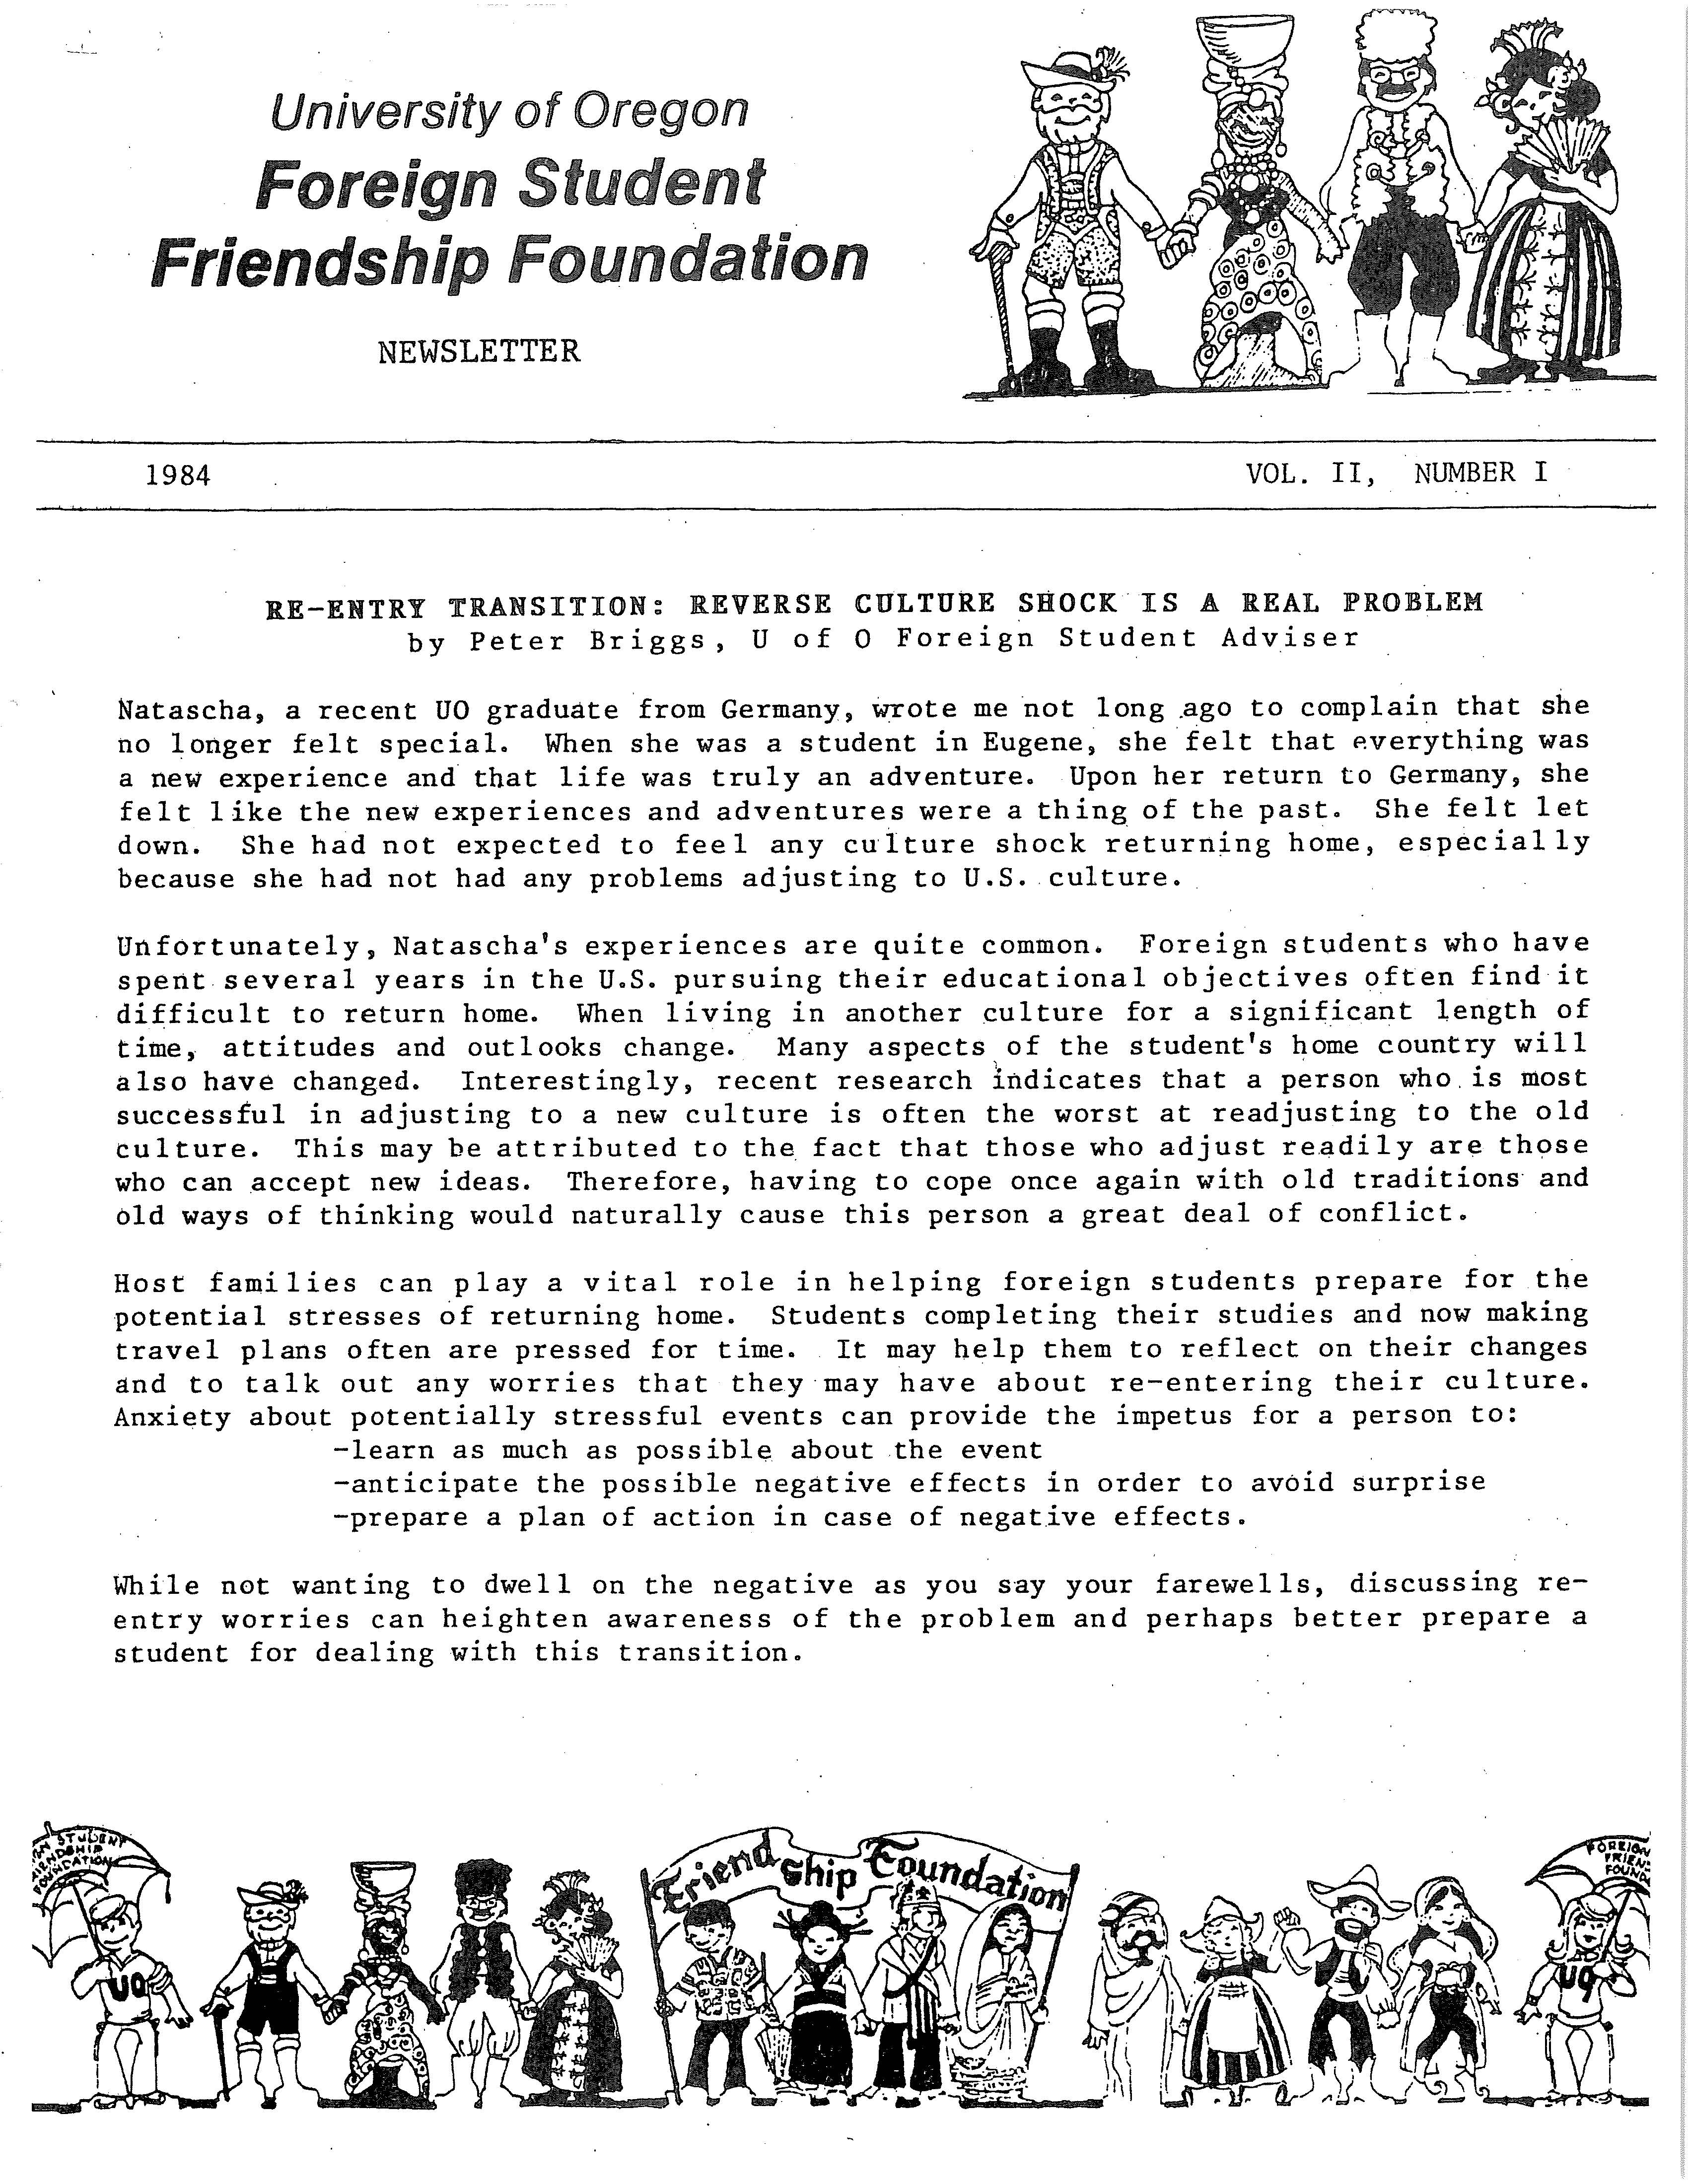 1984 Newsletter_Page_1